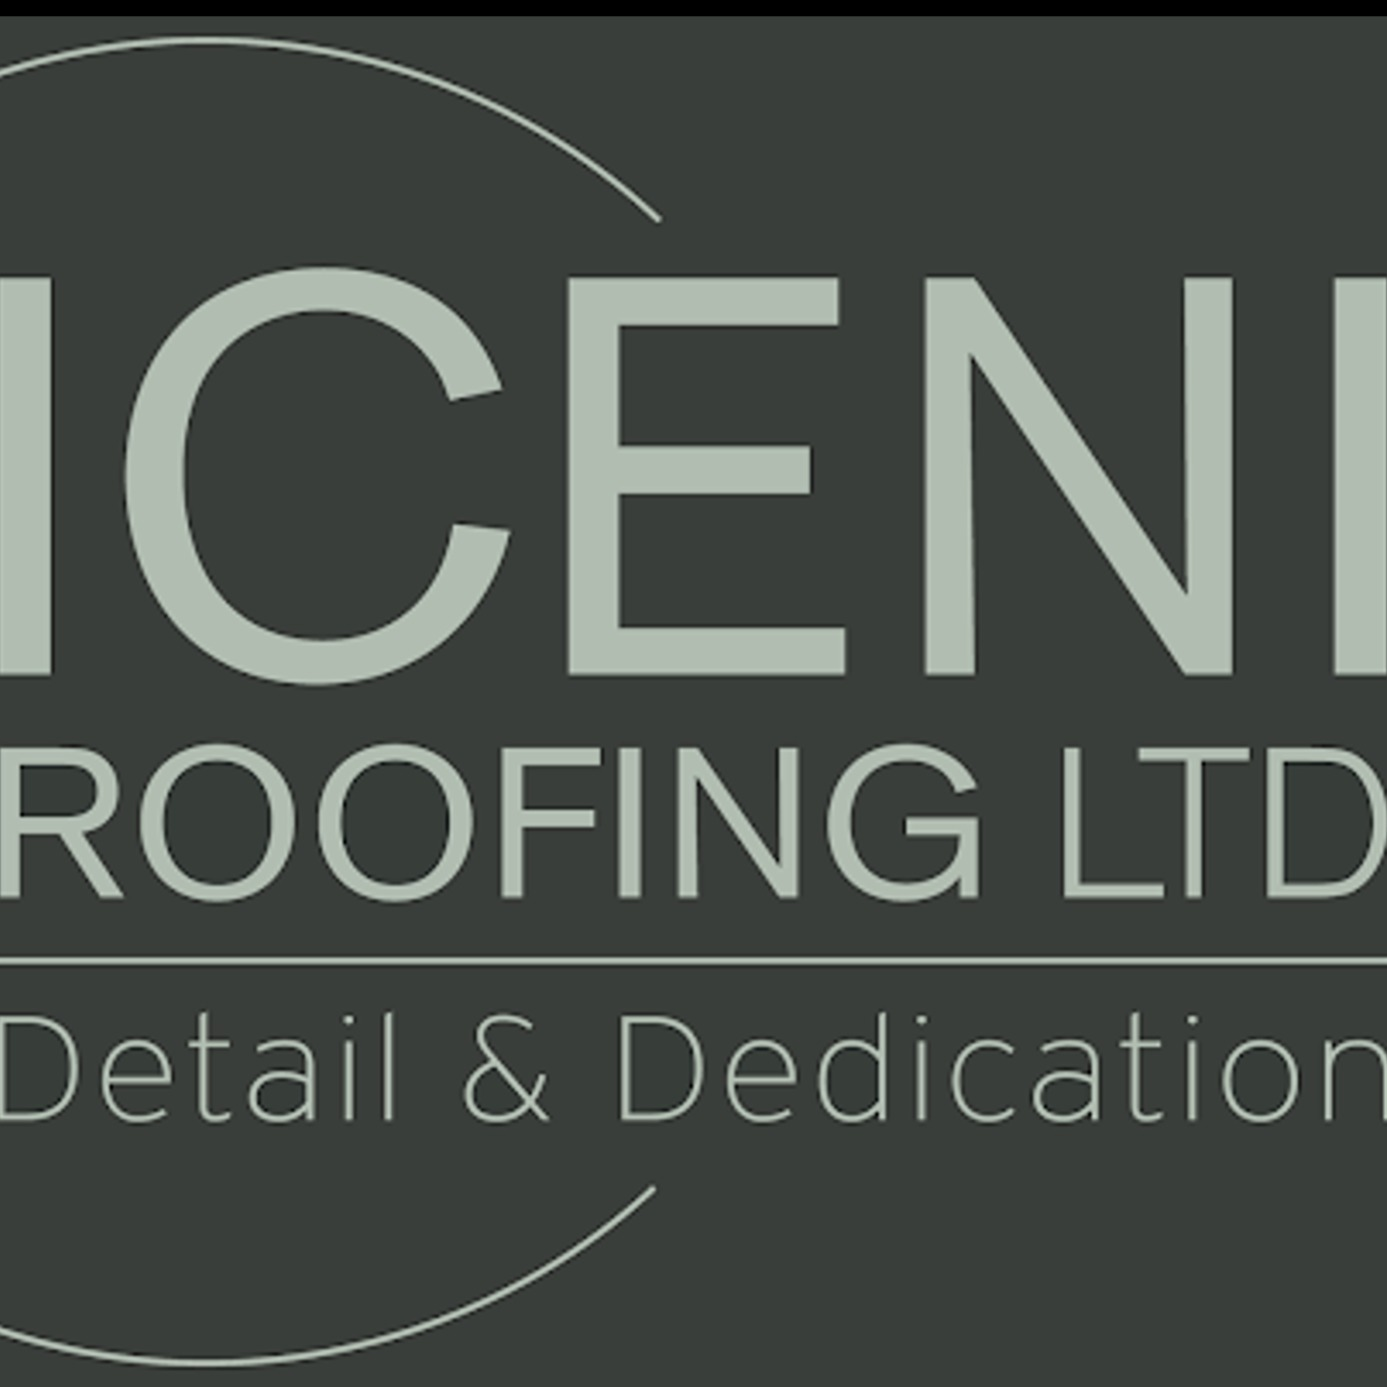 Iceni Roofing Limited - Watton, Norfolk IP25 6JU - 01953 438448 | ShowMeLocal.com